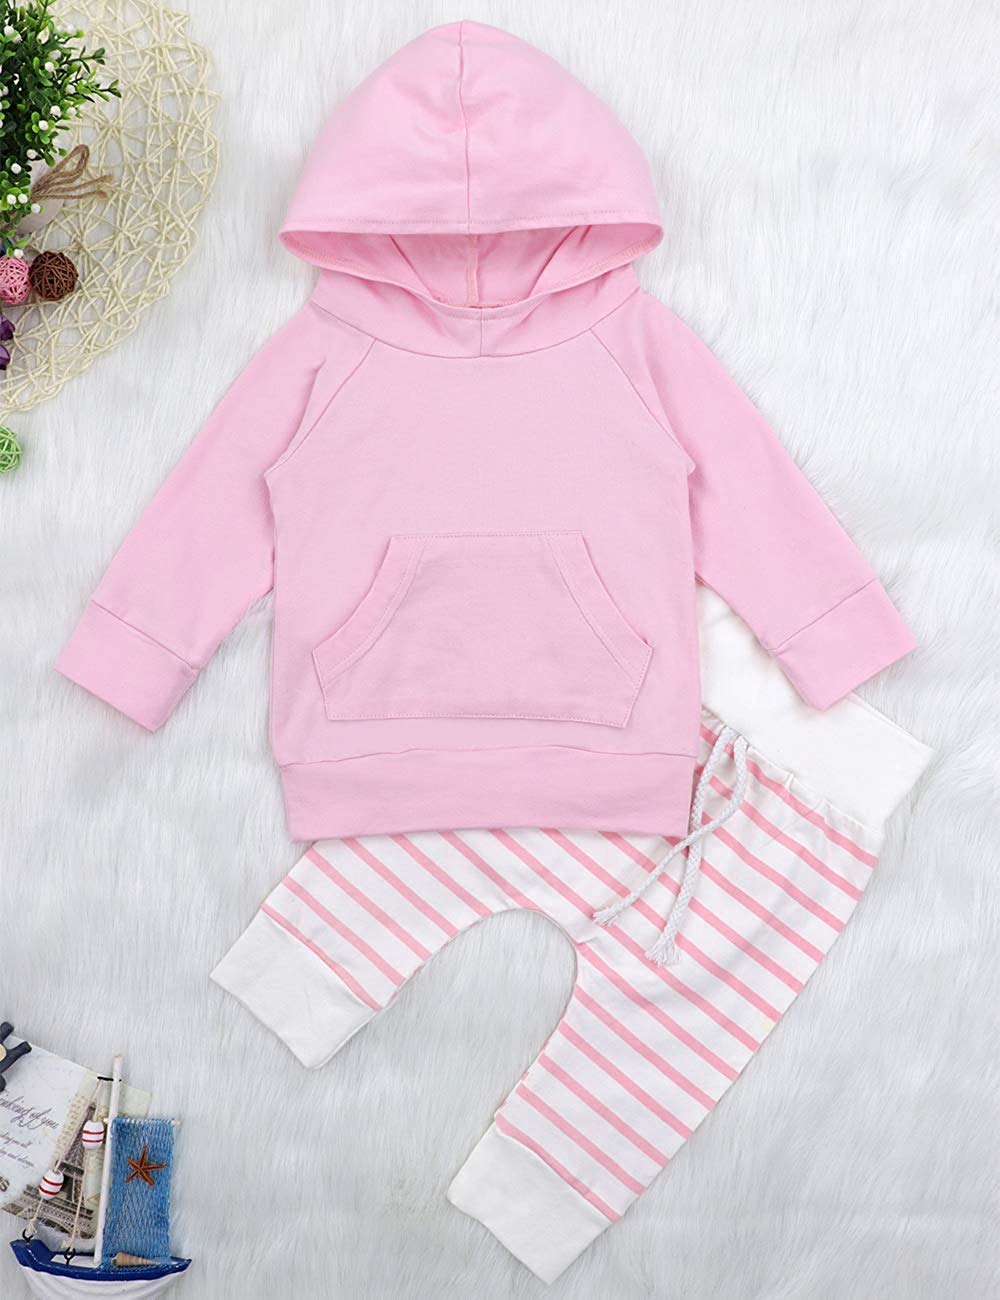 Okgirl Baby Girl Outfit Toddler Girl Clothes Long Sleeve Sweatshirt and Floral Pants Baby Girl Fall Clothes